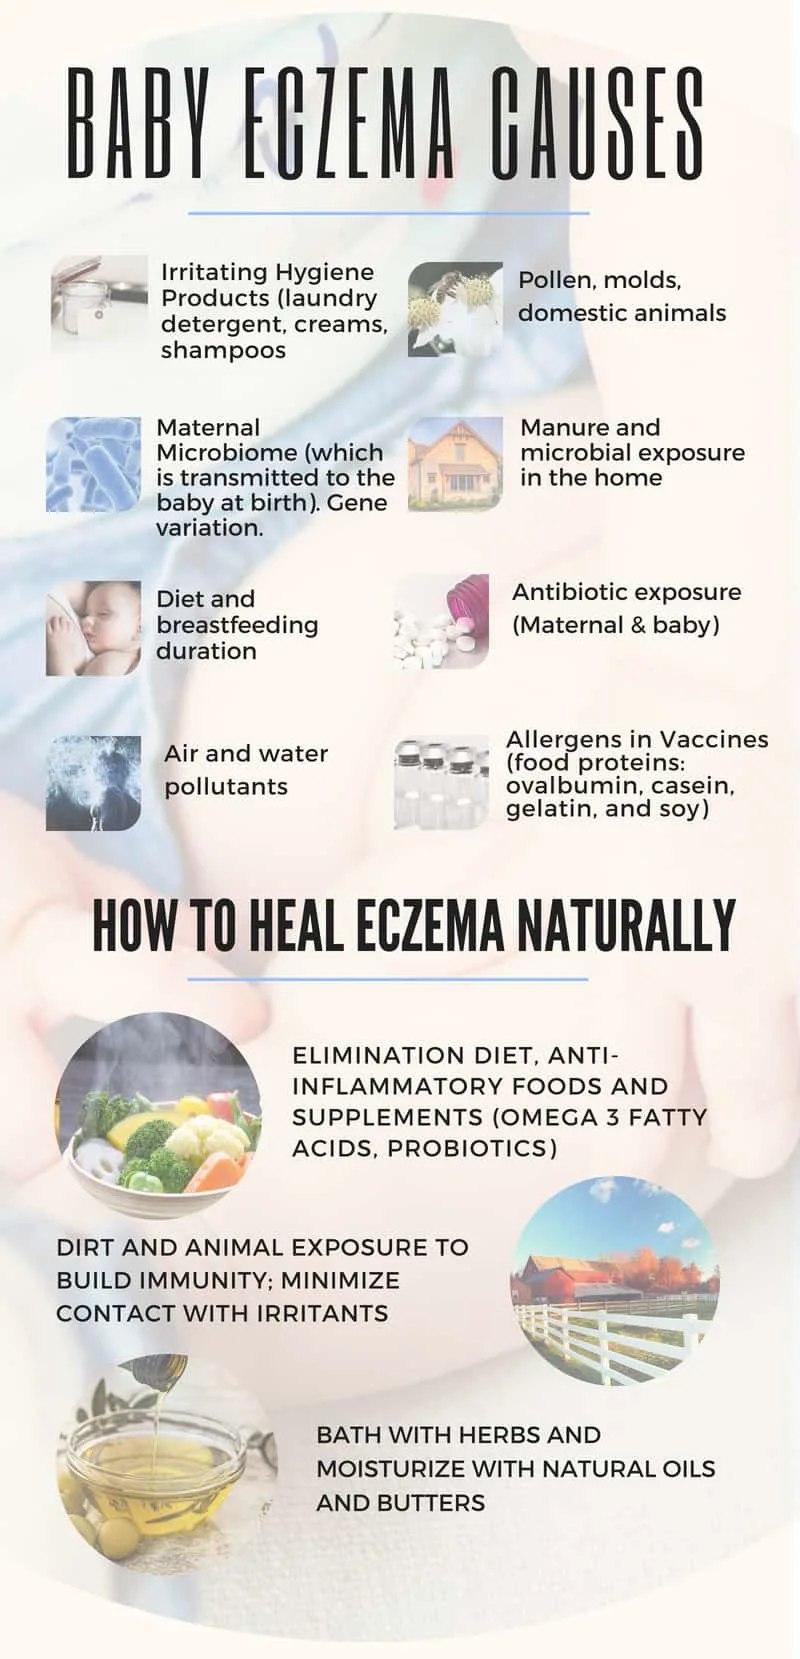 Find about real eczema root causes, the food triggers to avoid and food to make in order to heal your baby’s eczema. Learn more about the gut and baby eczema link and how to get rid of it naturally through diet.